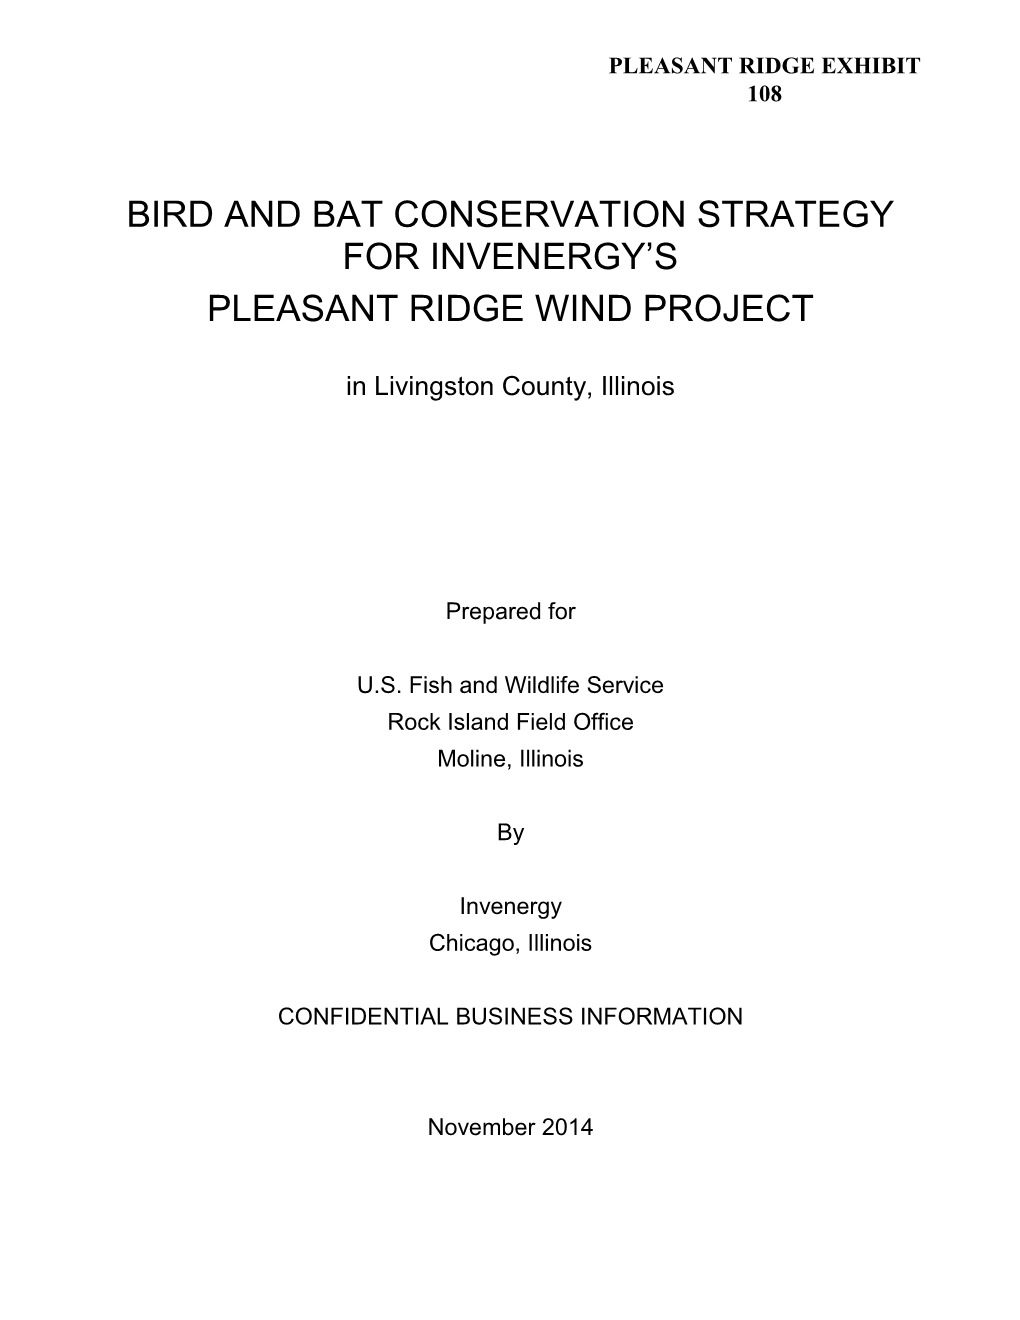 Bird and Bat Conservation Strategy for Invenergy's Pleasant Ridge Wind